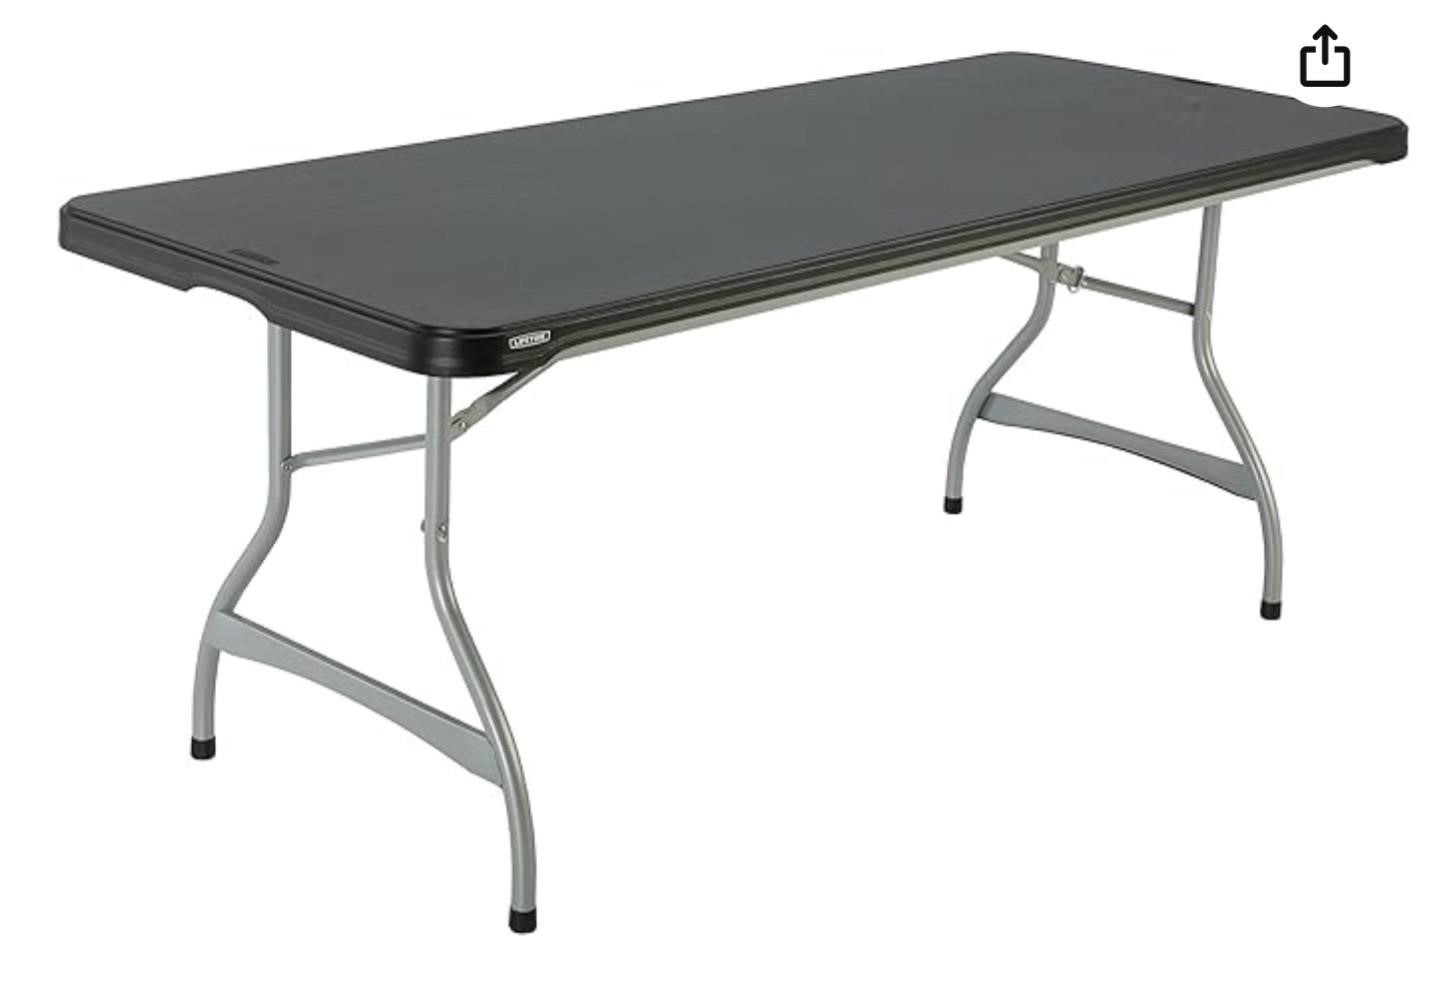 Lifetime Products 280350 Folding Table, 6', Black